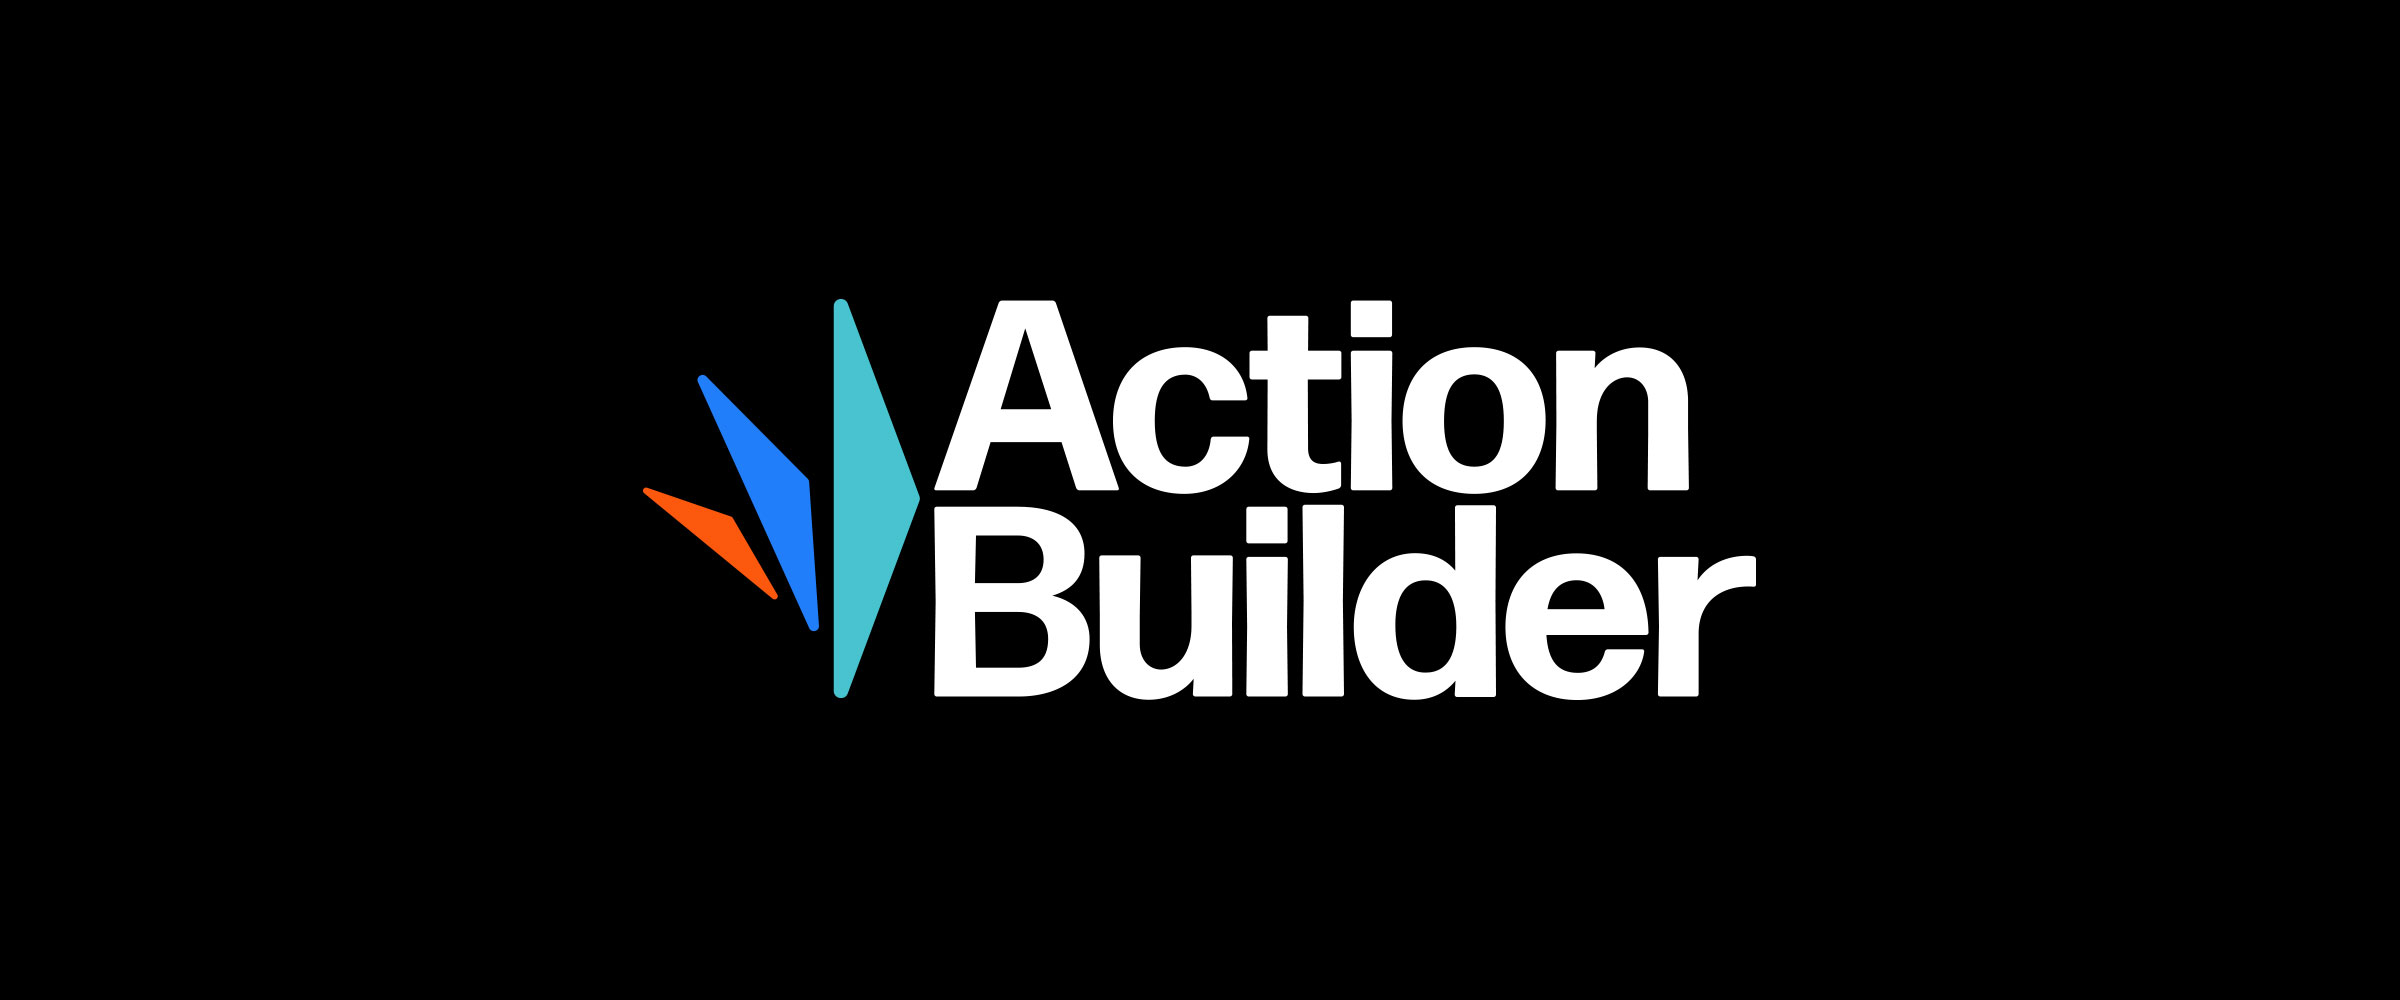 The Action Builder logo on a black background